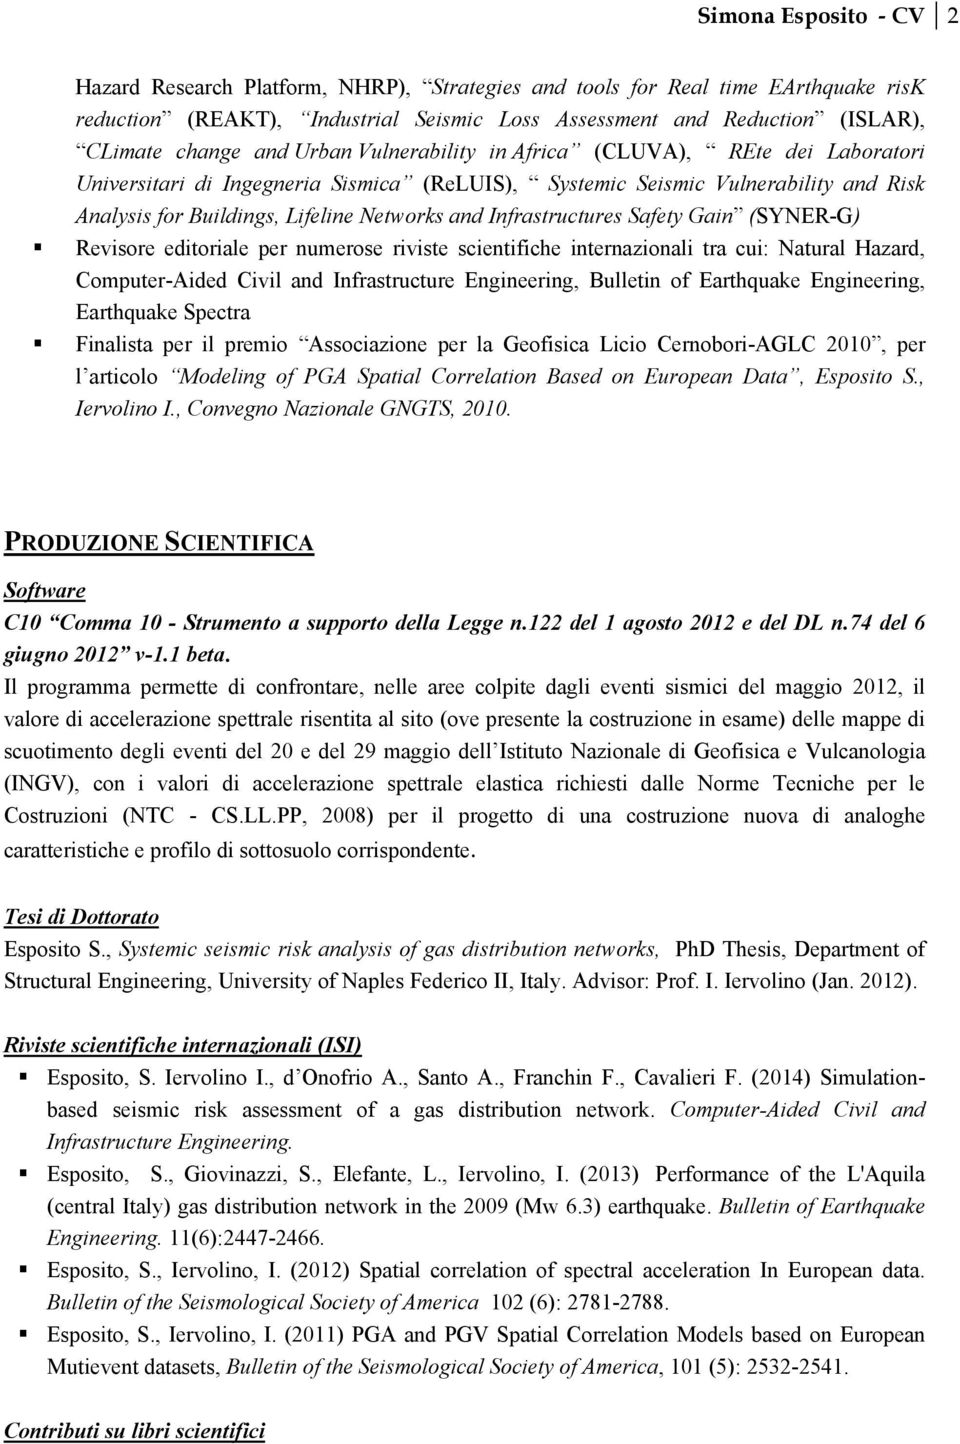 Infrastructures Safety Gain (SYNER-G) Revisore editoriale per numerose riviste scientifiche internazionali tra cui: Natural Hazard, Computer-Aided Civil and Infrastructure Engineering, Bulletin of